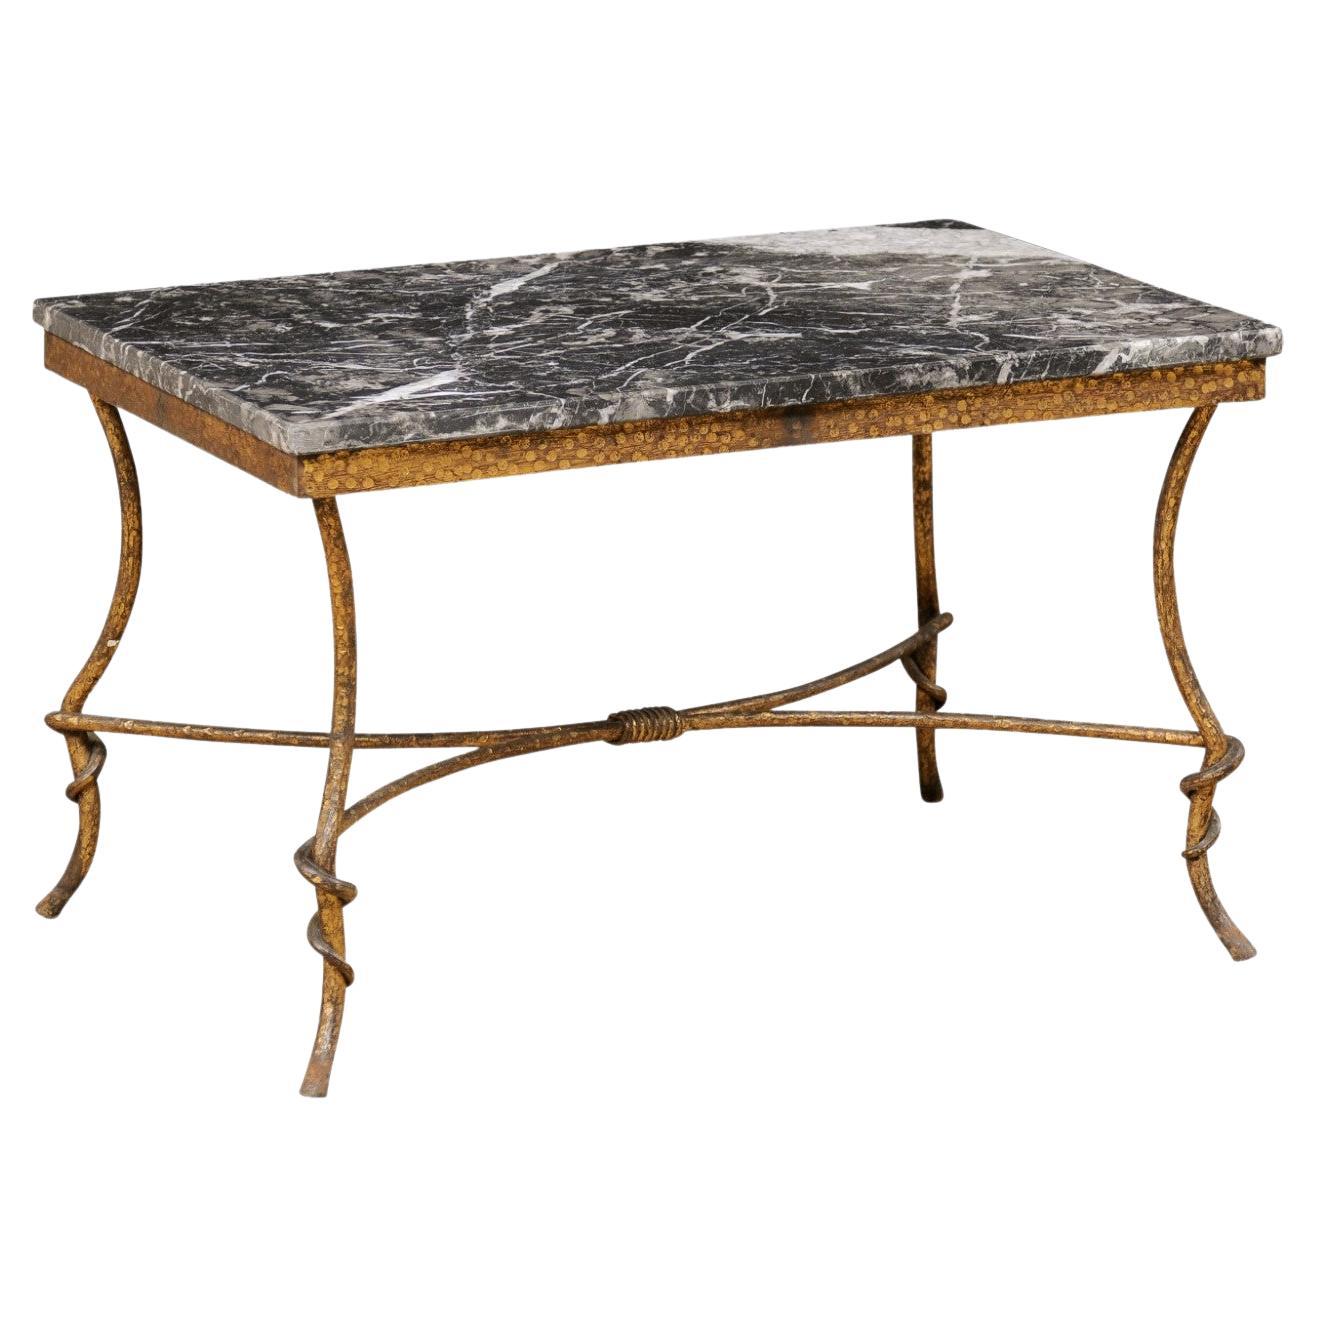 Spanish Marble-Top Rectangular Coffee Table w/Hammered Gold-Tone Iron Base For Sale